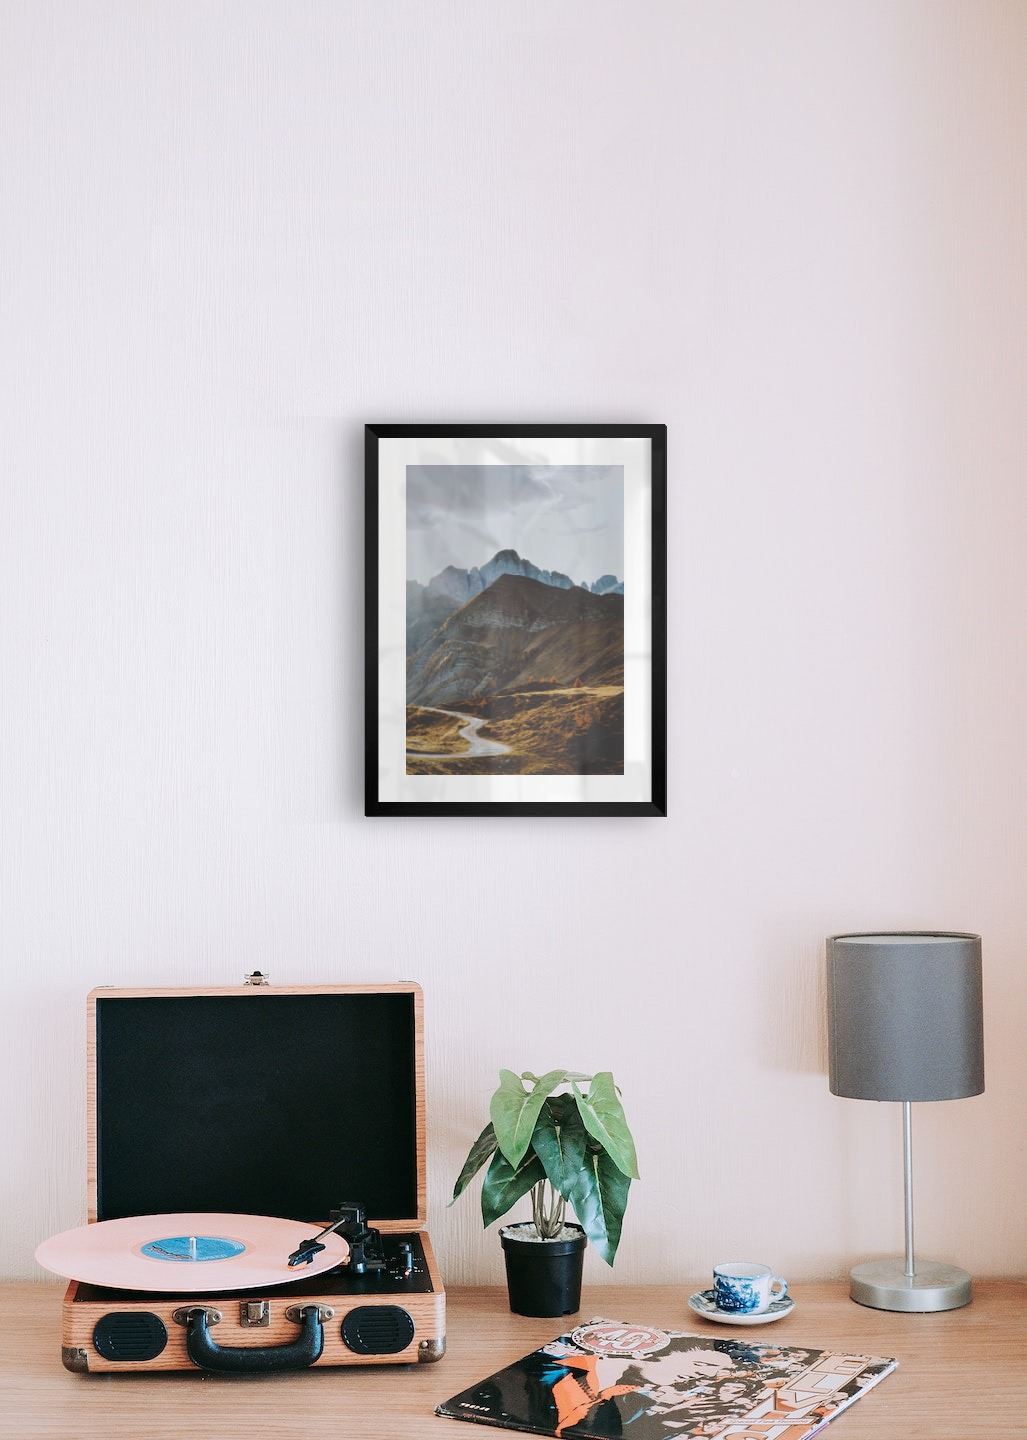 Gallery wall with picture frame in black in size 30x40 with print "Road among the mountains"